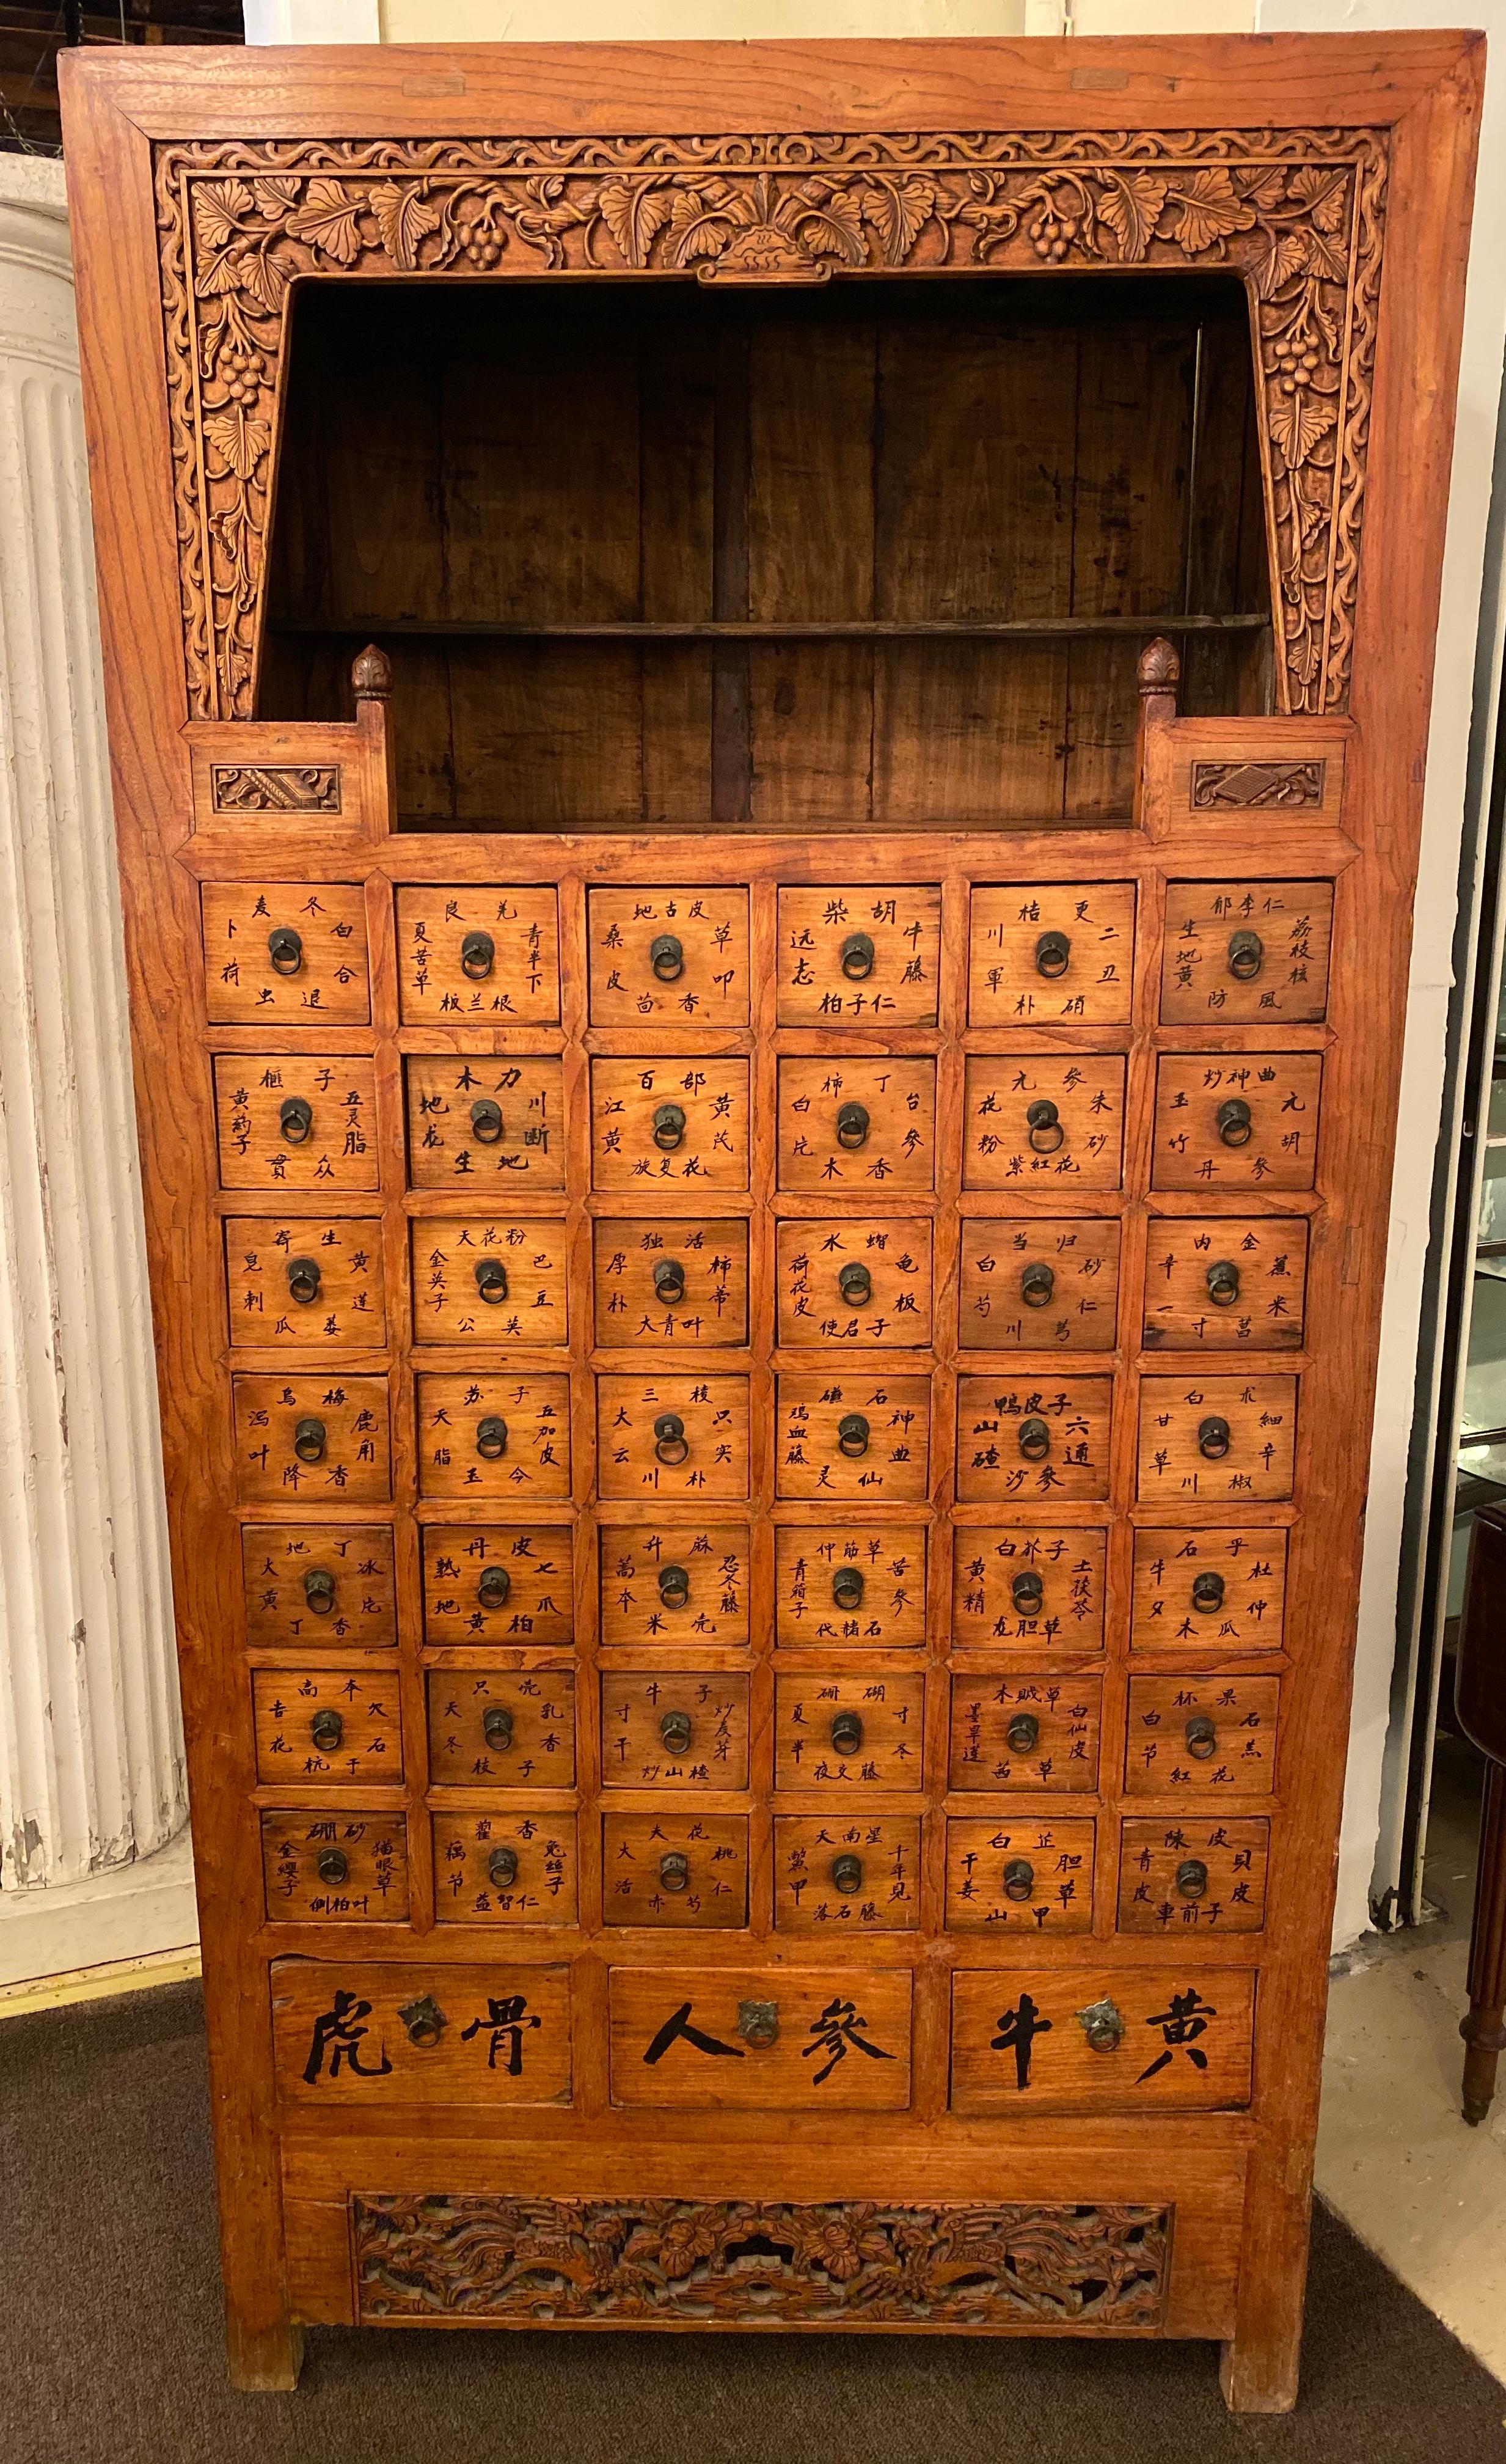 19th century apothecary cabinet having 45 drawers. Large and impressive. This fine cabinet is from the late
19th or early 20th century Ming style herbal cabinet, from Northern China. The top opening has serpentine carving (a little filigree) on